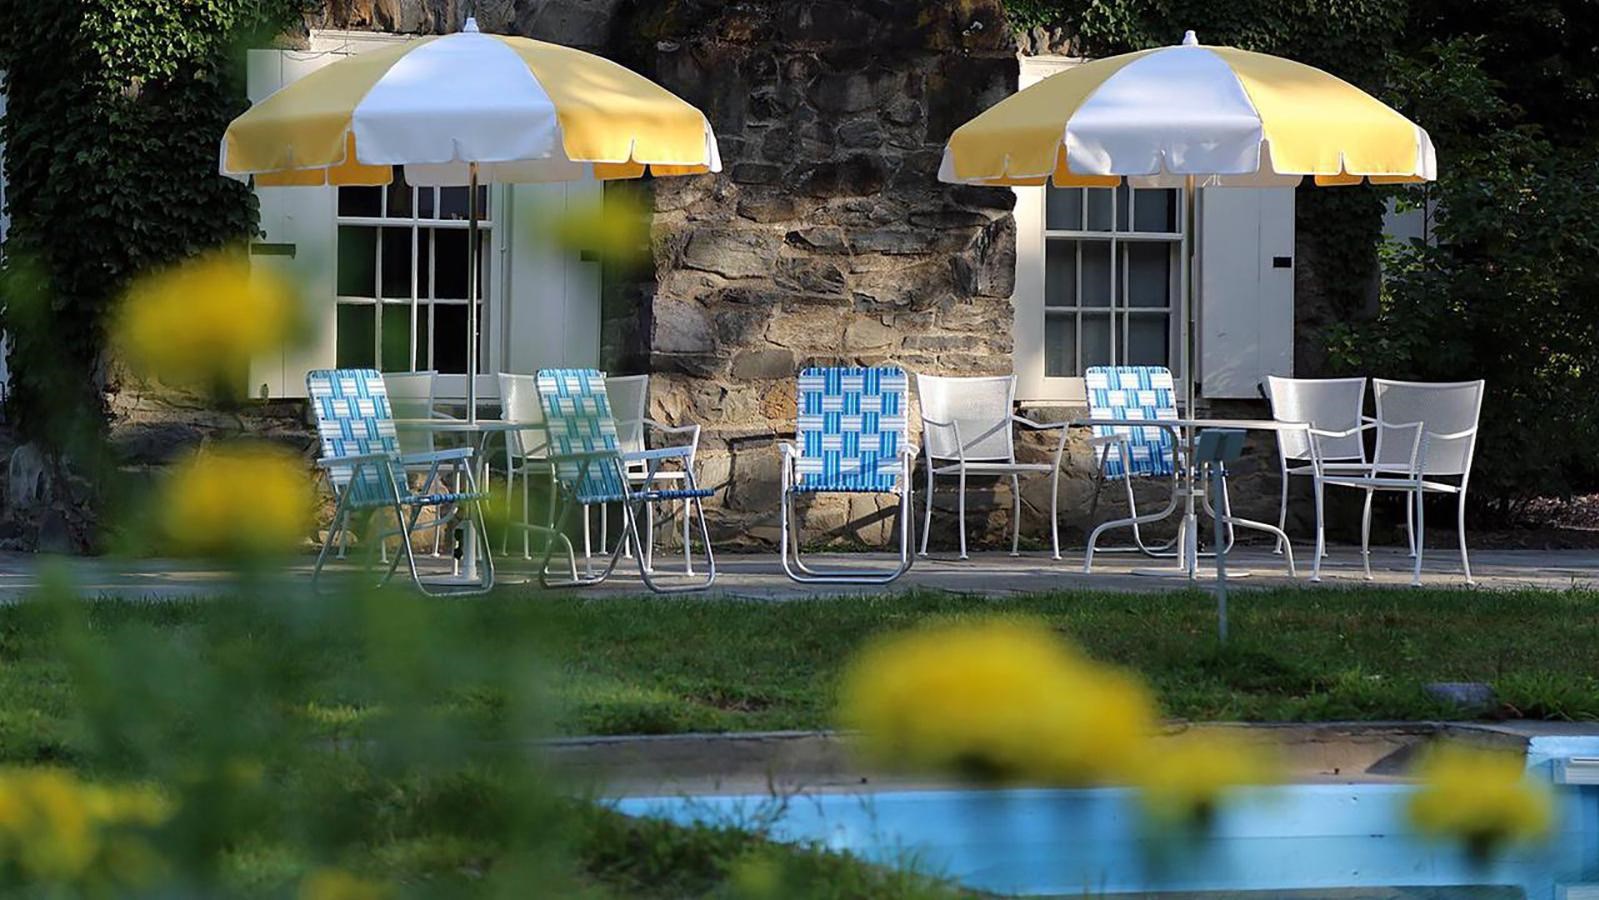 A group of tables with umbrellas and folding chairs on the edge of a swimming pool amid a grass lawn